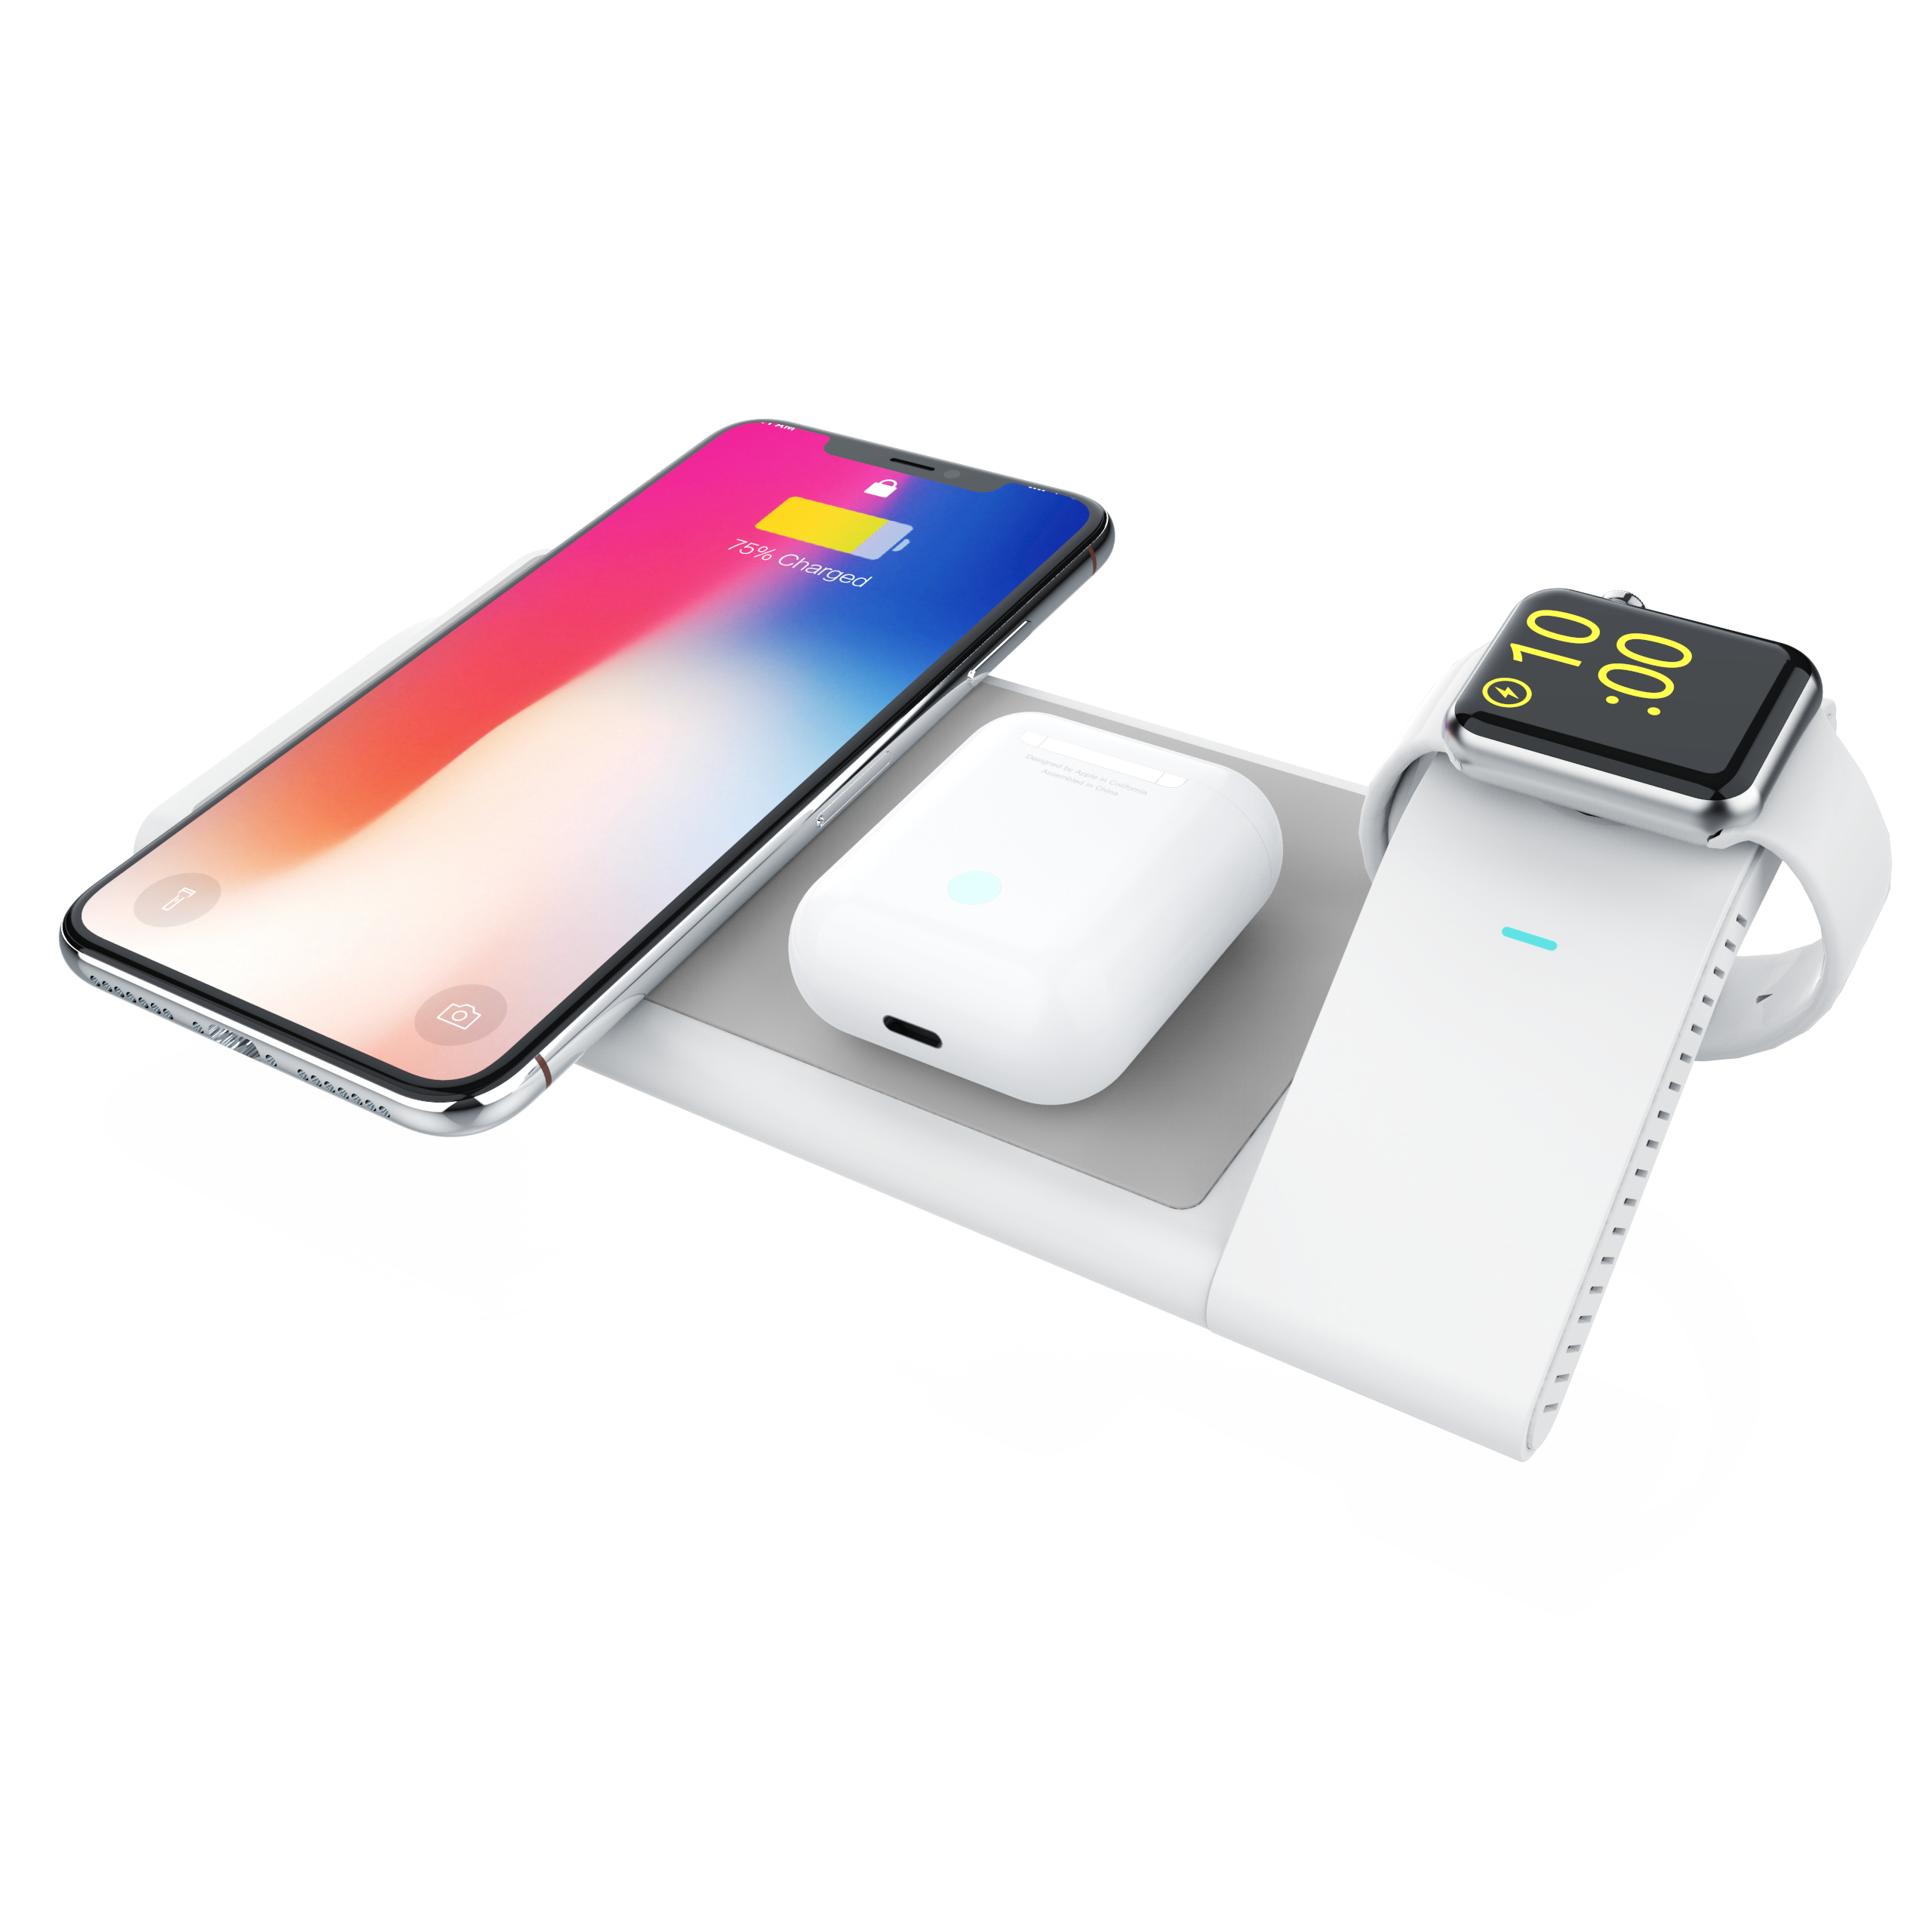 Desktop Type Wireless Charger with MFi Certified DW06 (Planning)